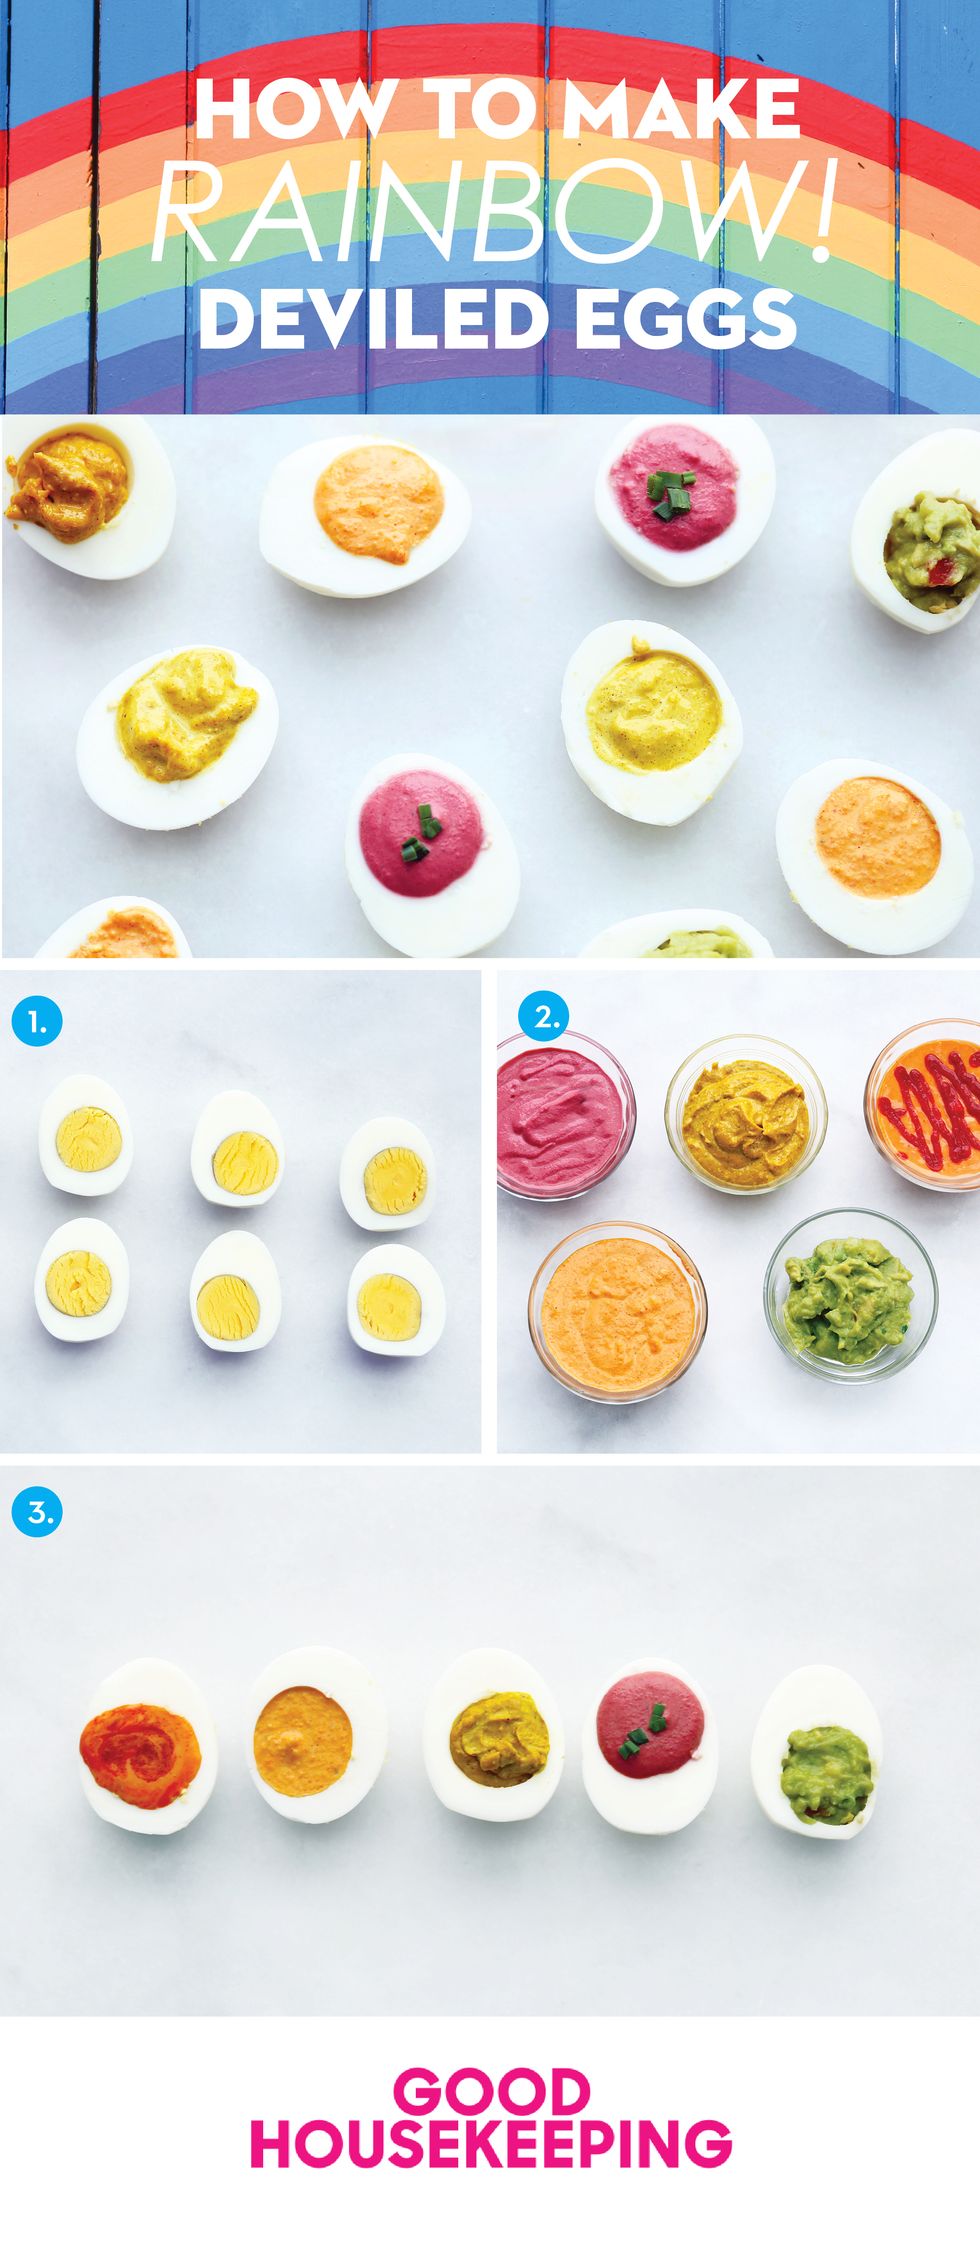 How to hard boil and make deviled eggs